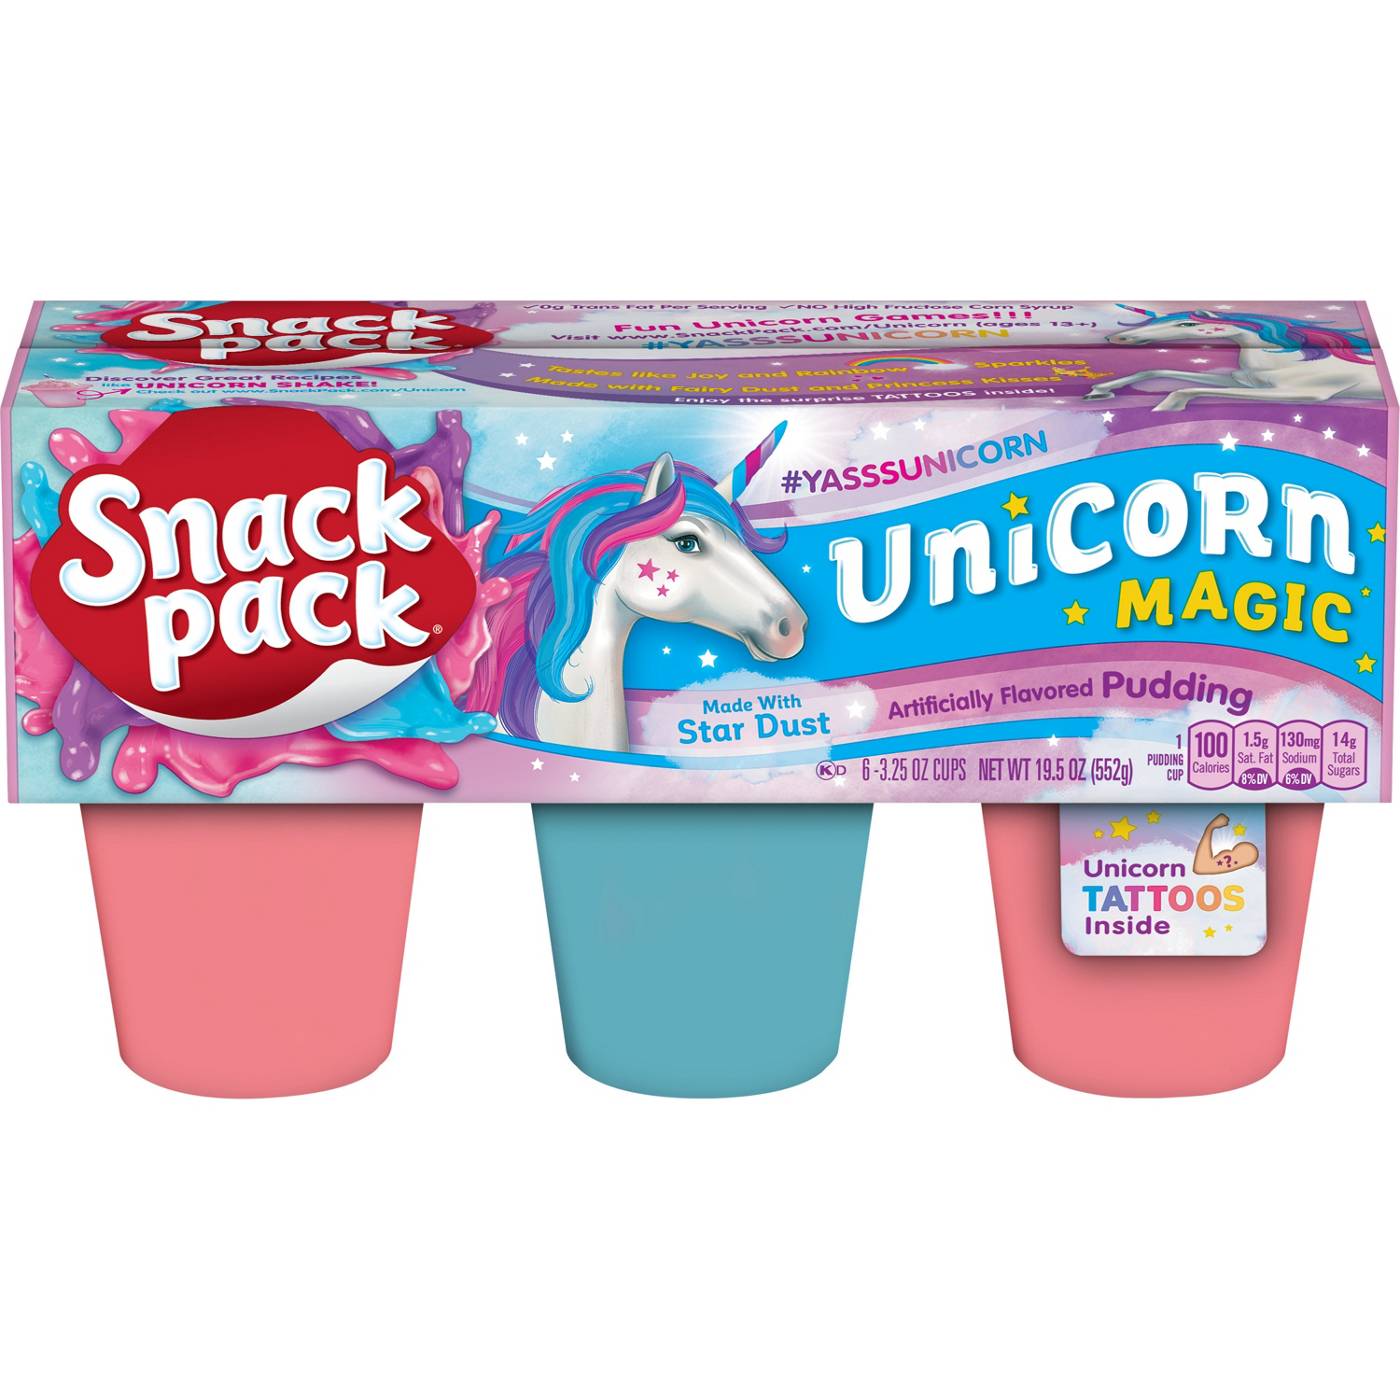 Snack Pack Unicorn Magic Pudding Cups; image 1 of 7